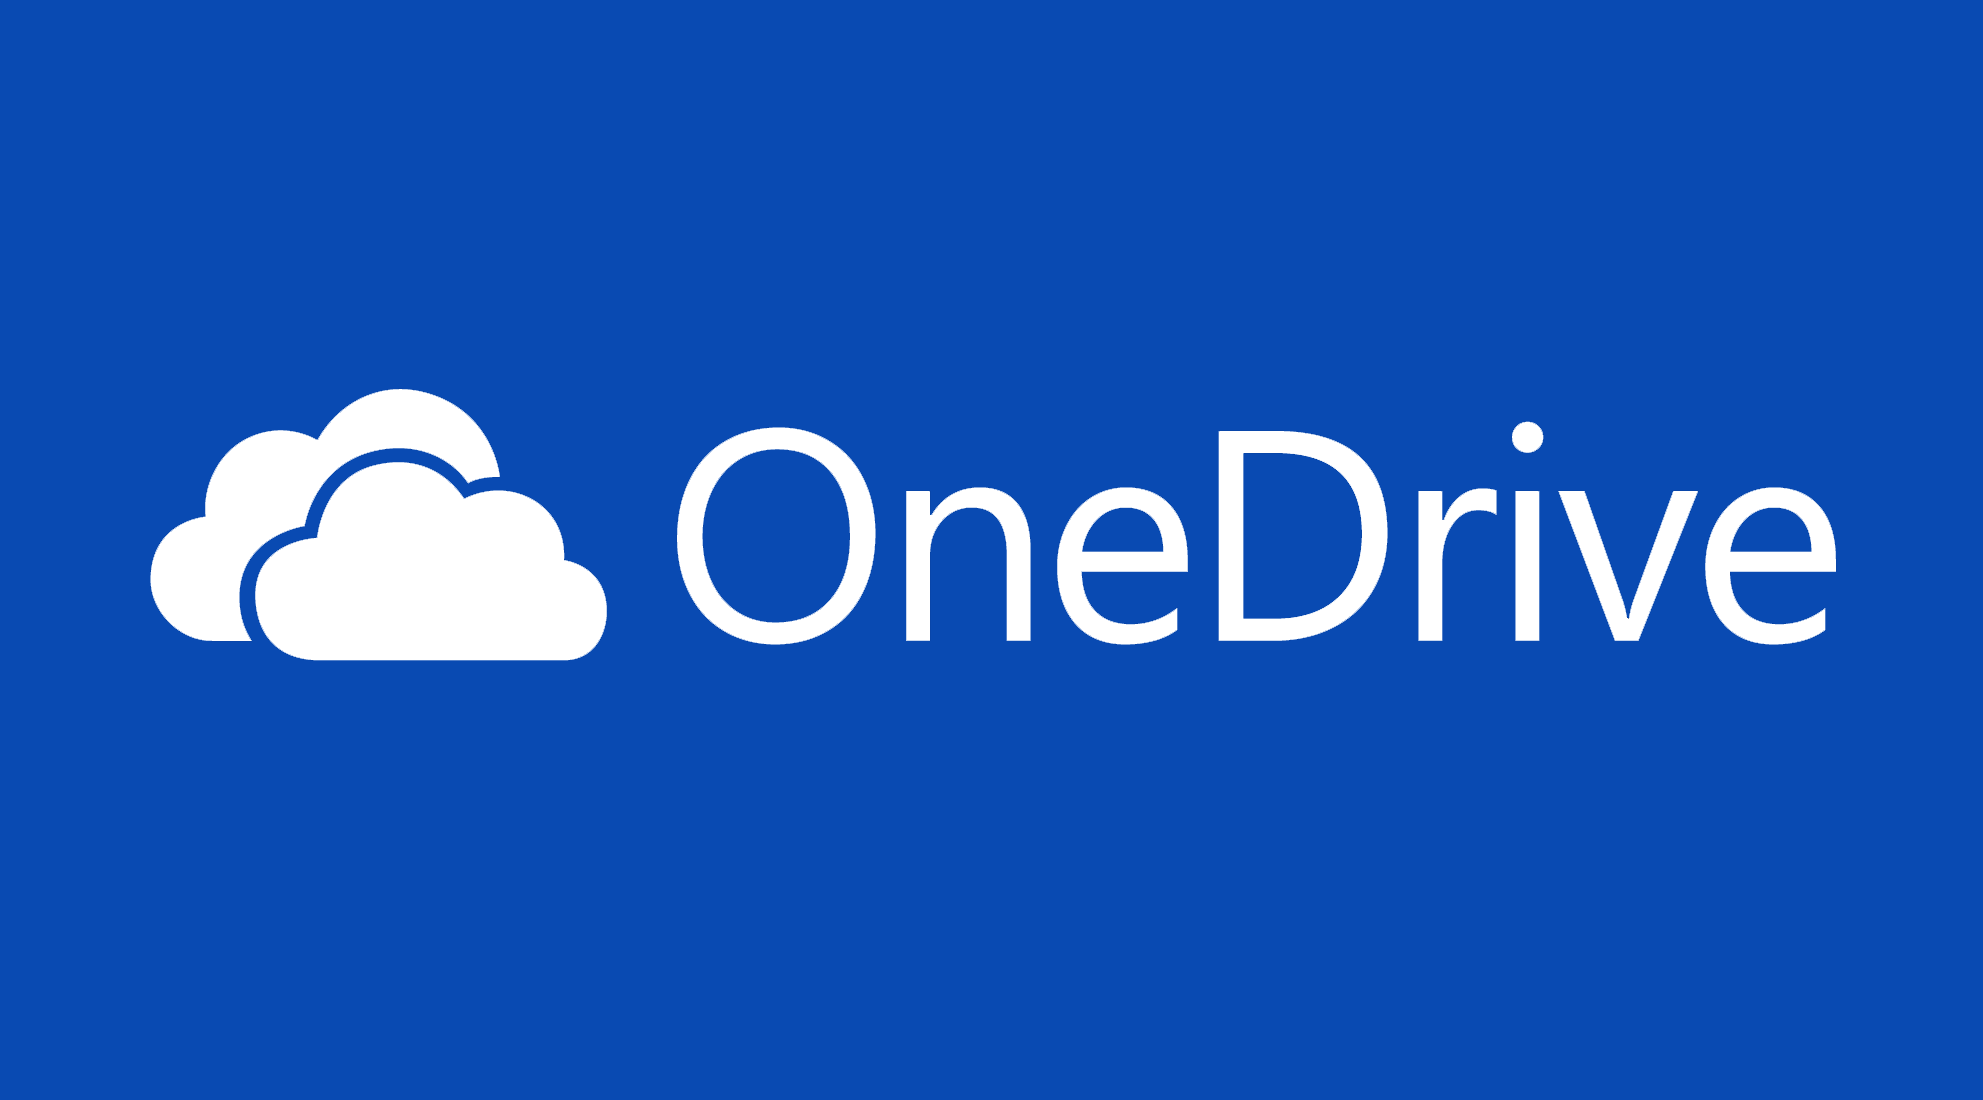 An Office 365 subscription now comes with unlimited OneDrive storage - ShinyShiny